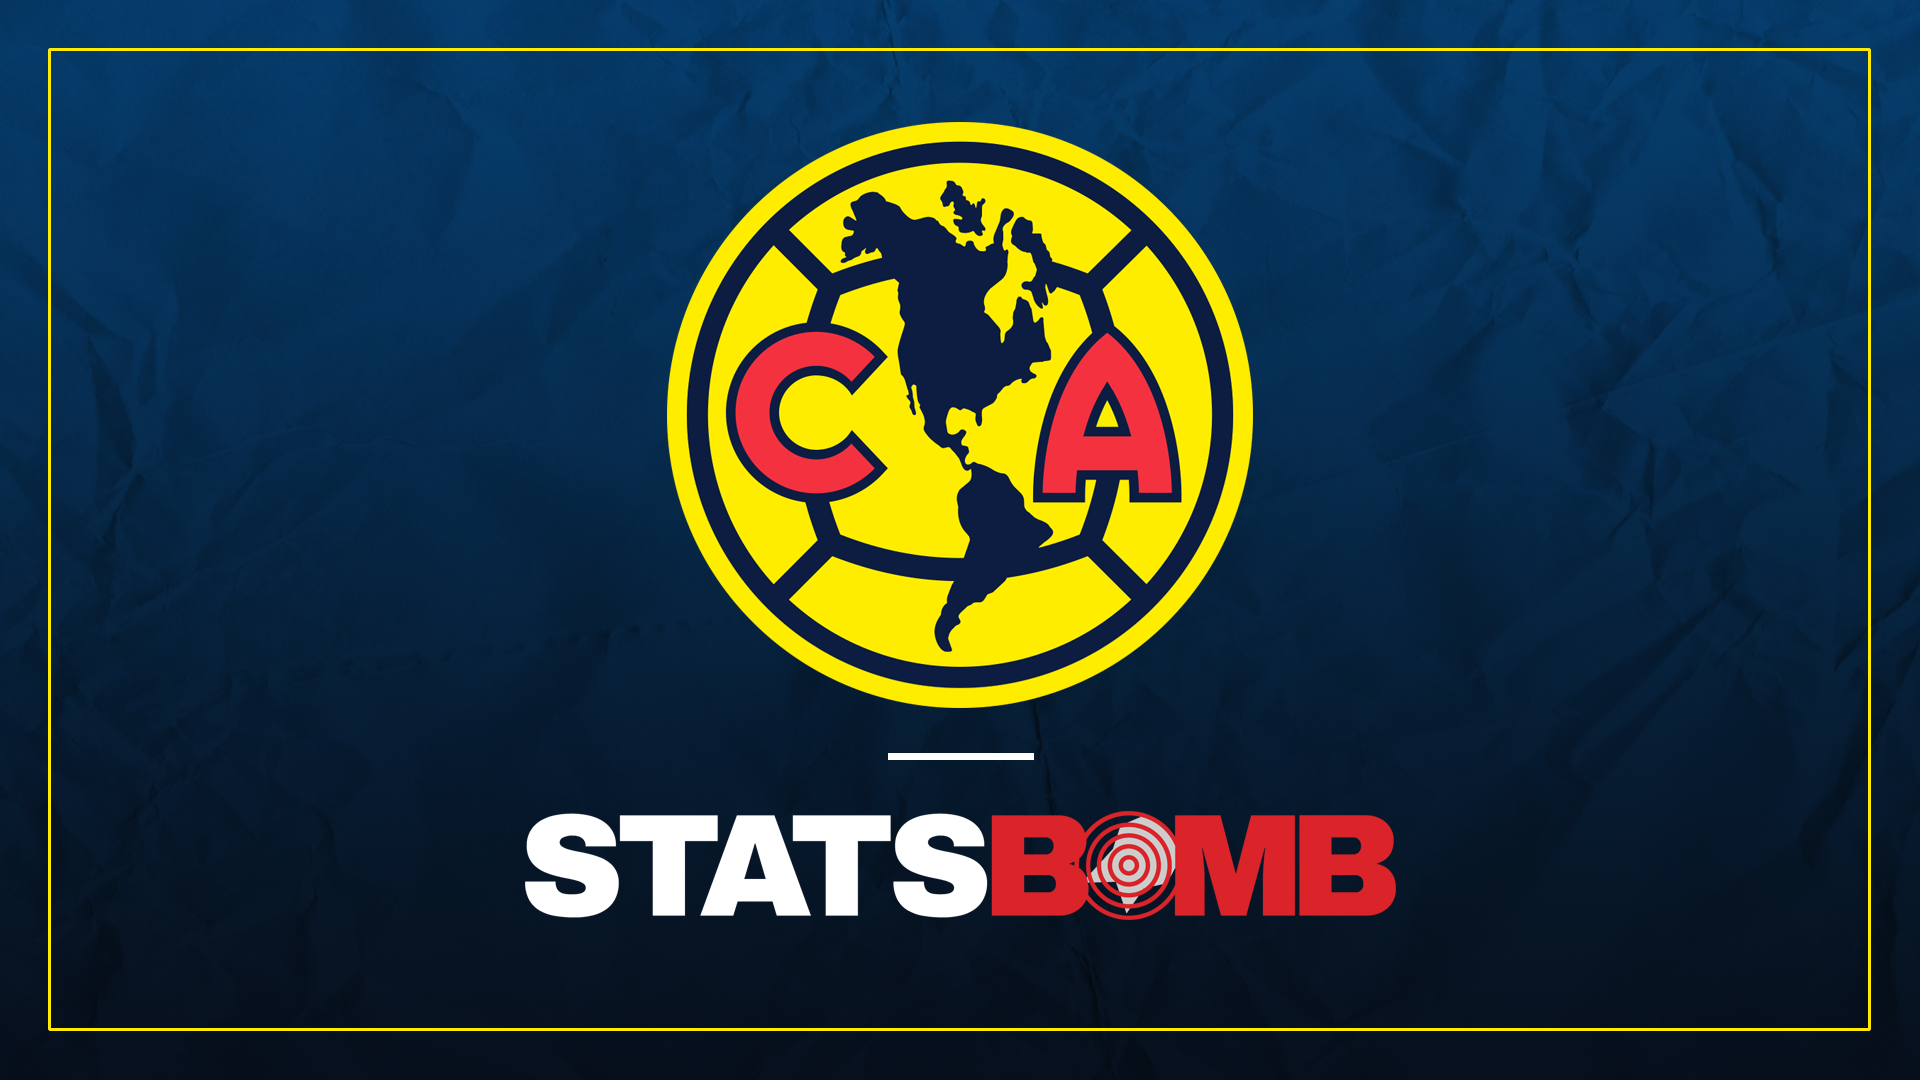 StatsBomb Sign Agreement with Club América, One of the Biggest Teams in Latin America